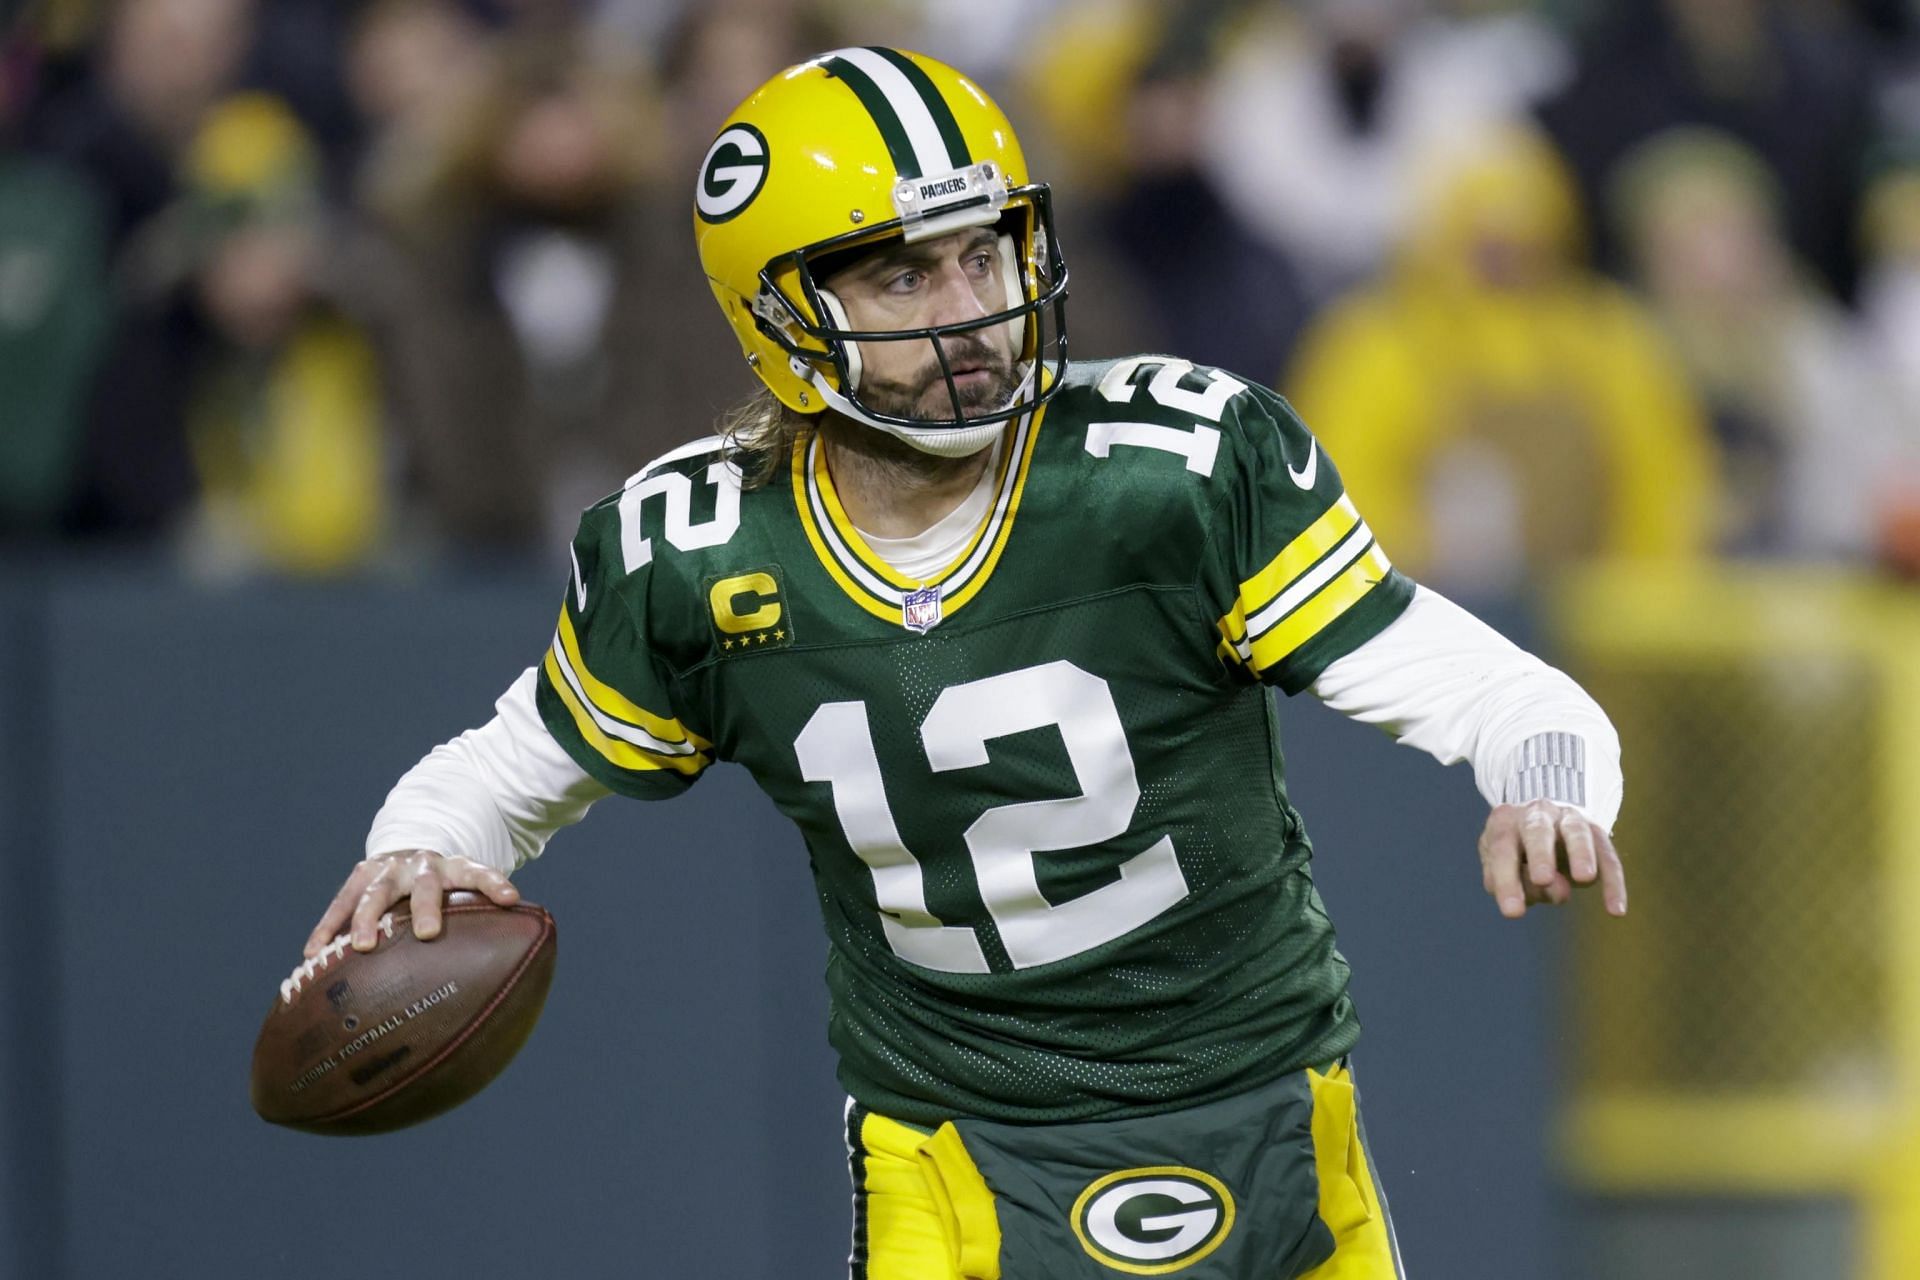 Aaron Rodgers will start for the Packers in Week 2